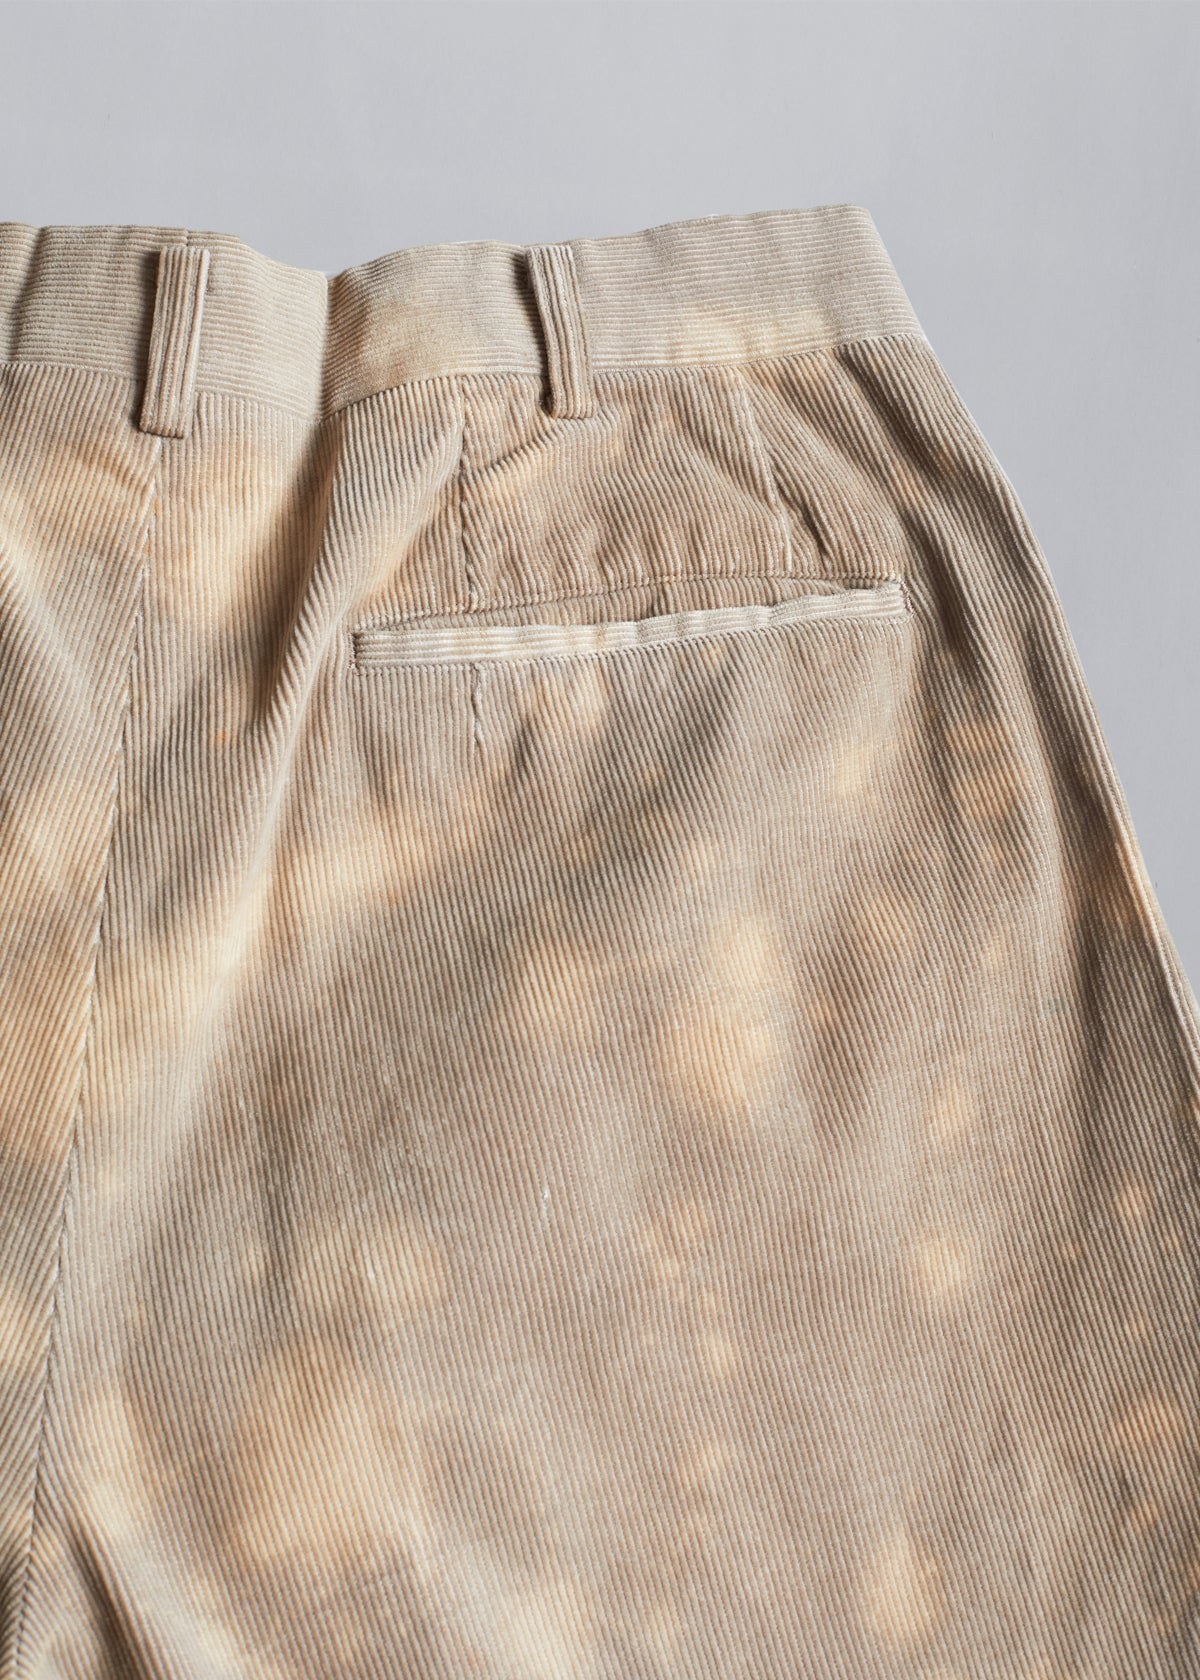 Homme Bleached Corduroy Pants AW1994 - Medium - The Archivist Store